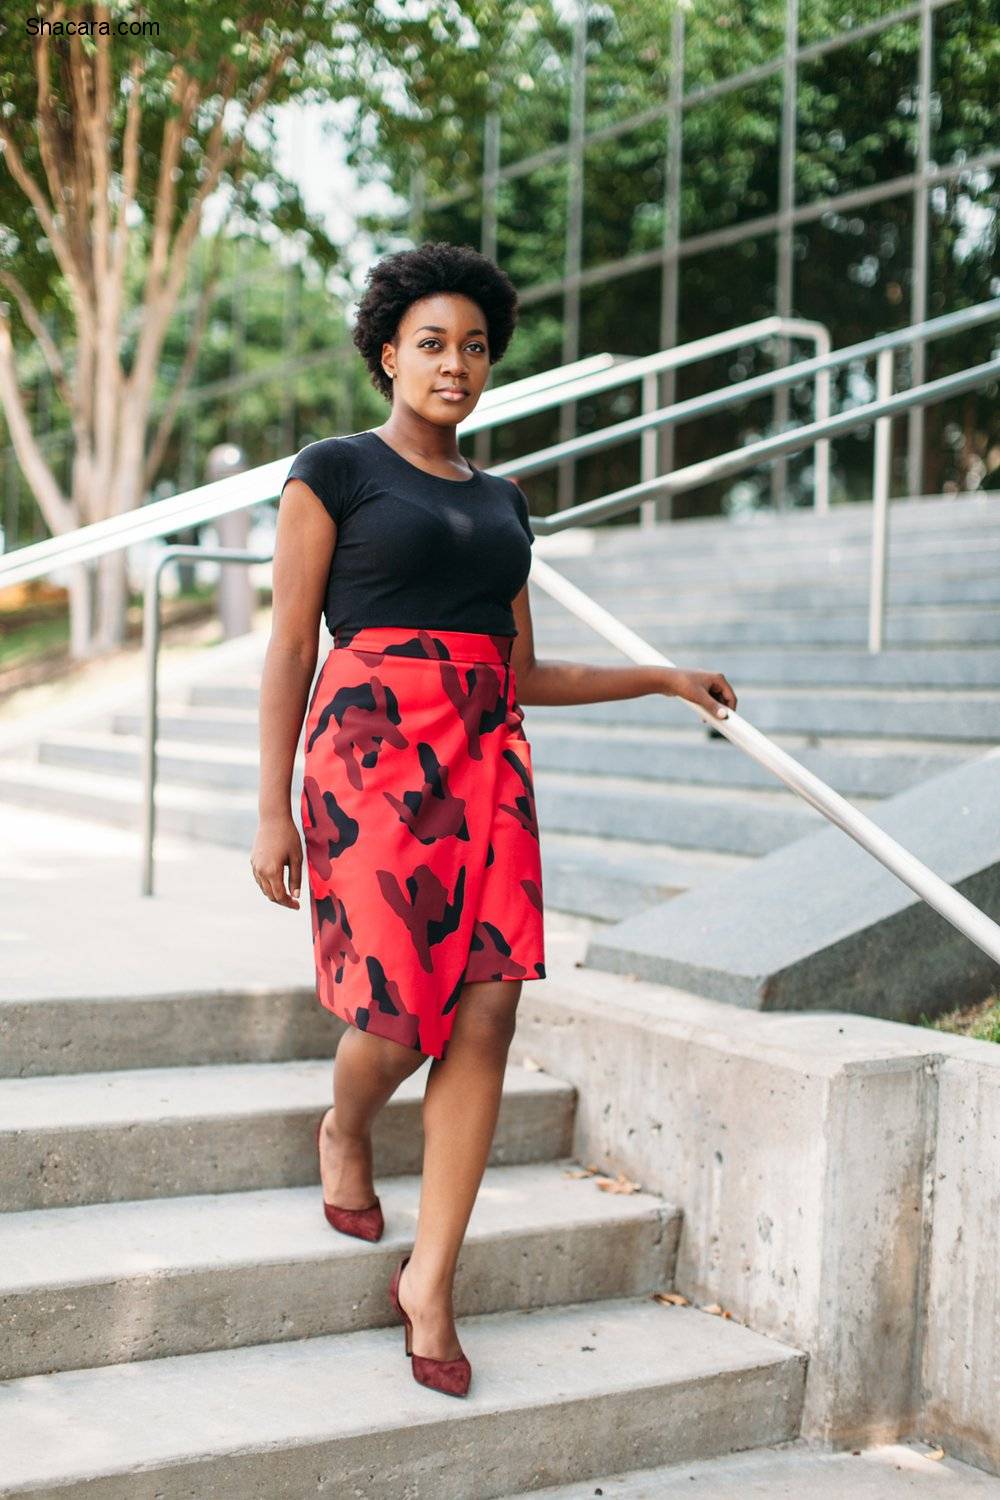 SUIT YOUR BODY TYPE WITH THESE SKIRTS